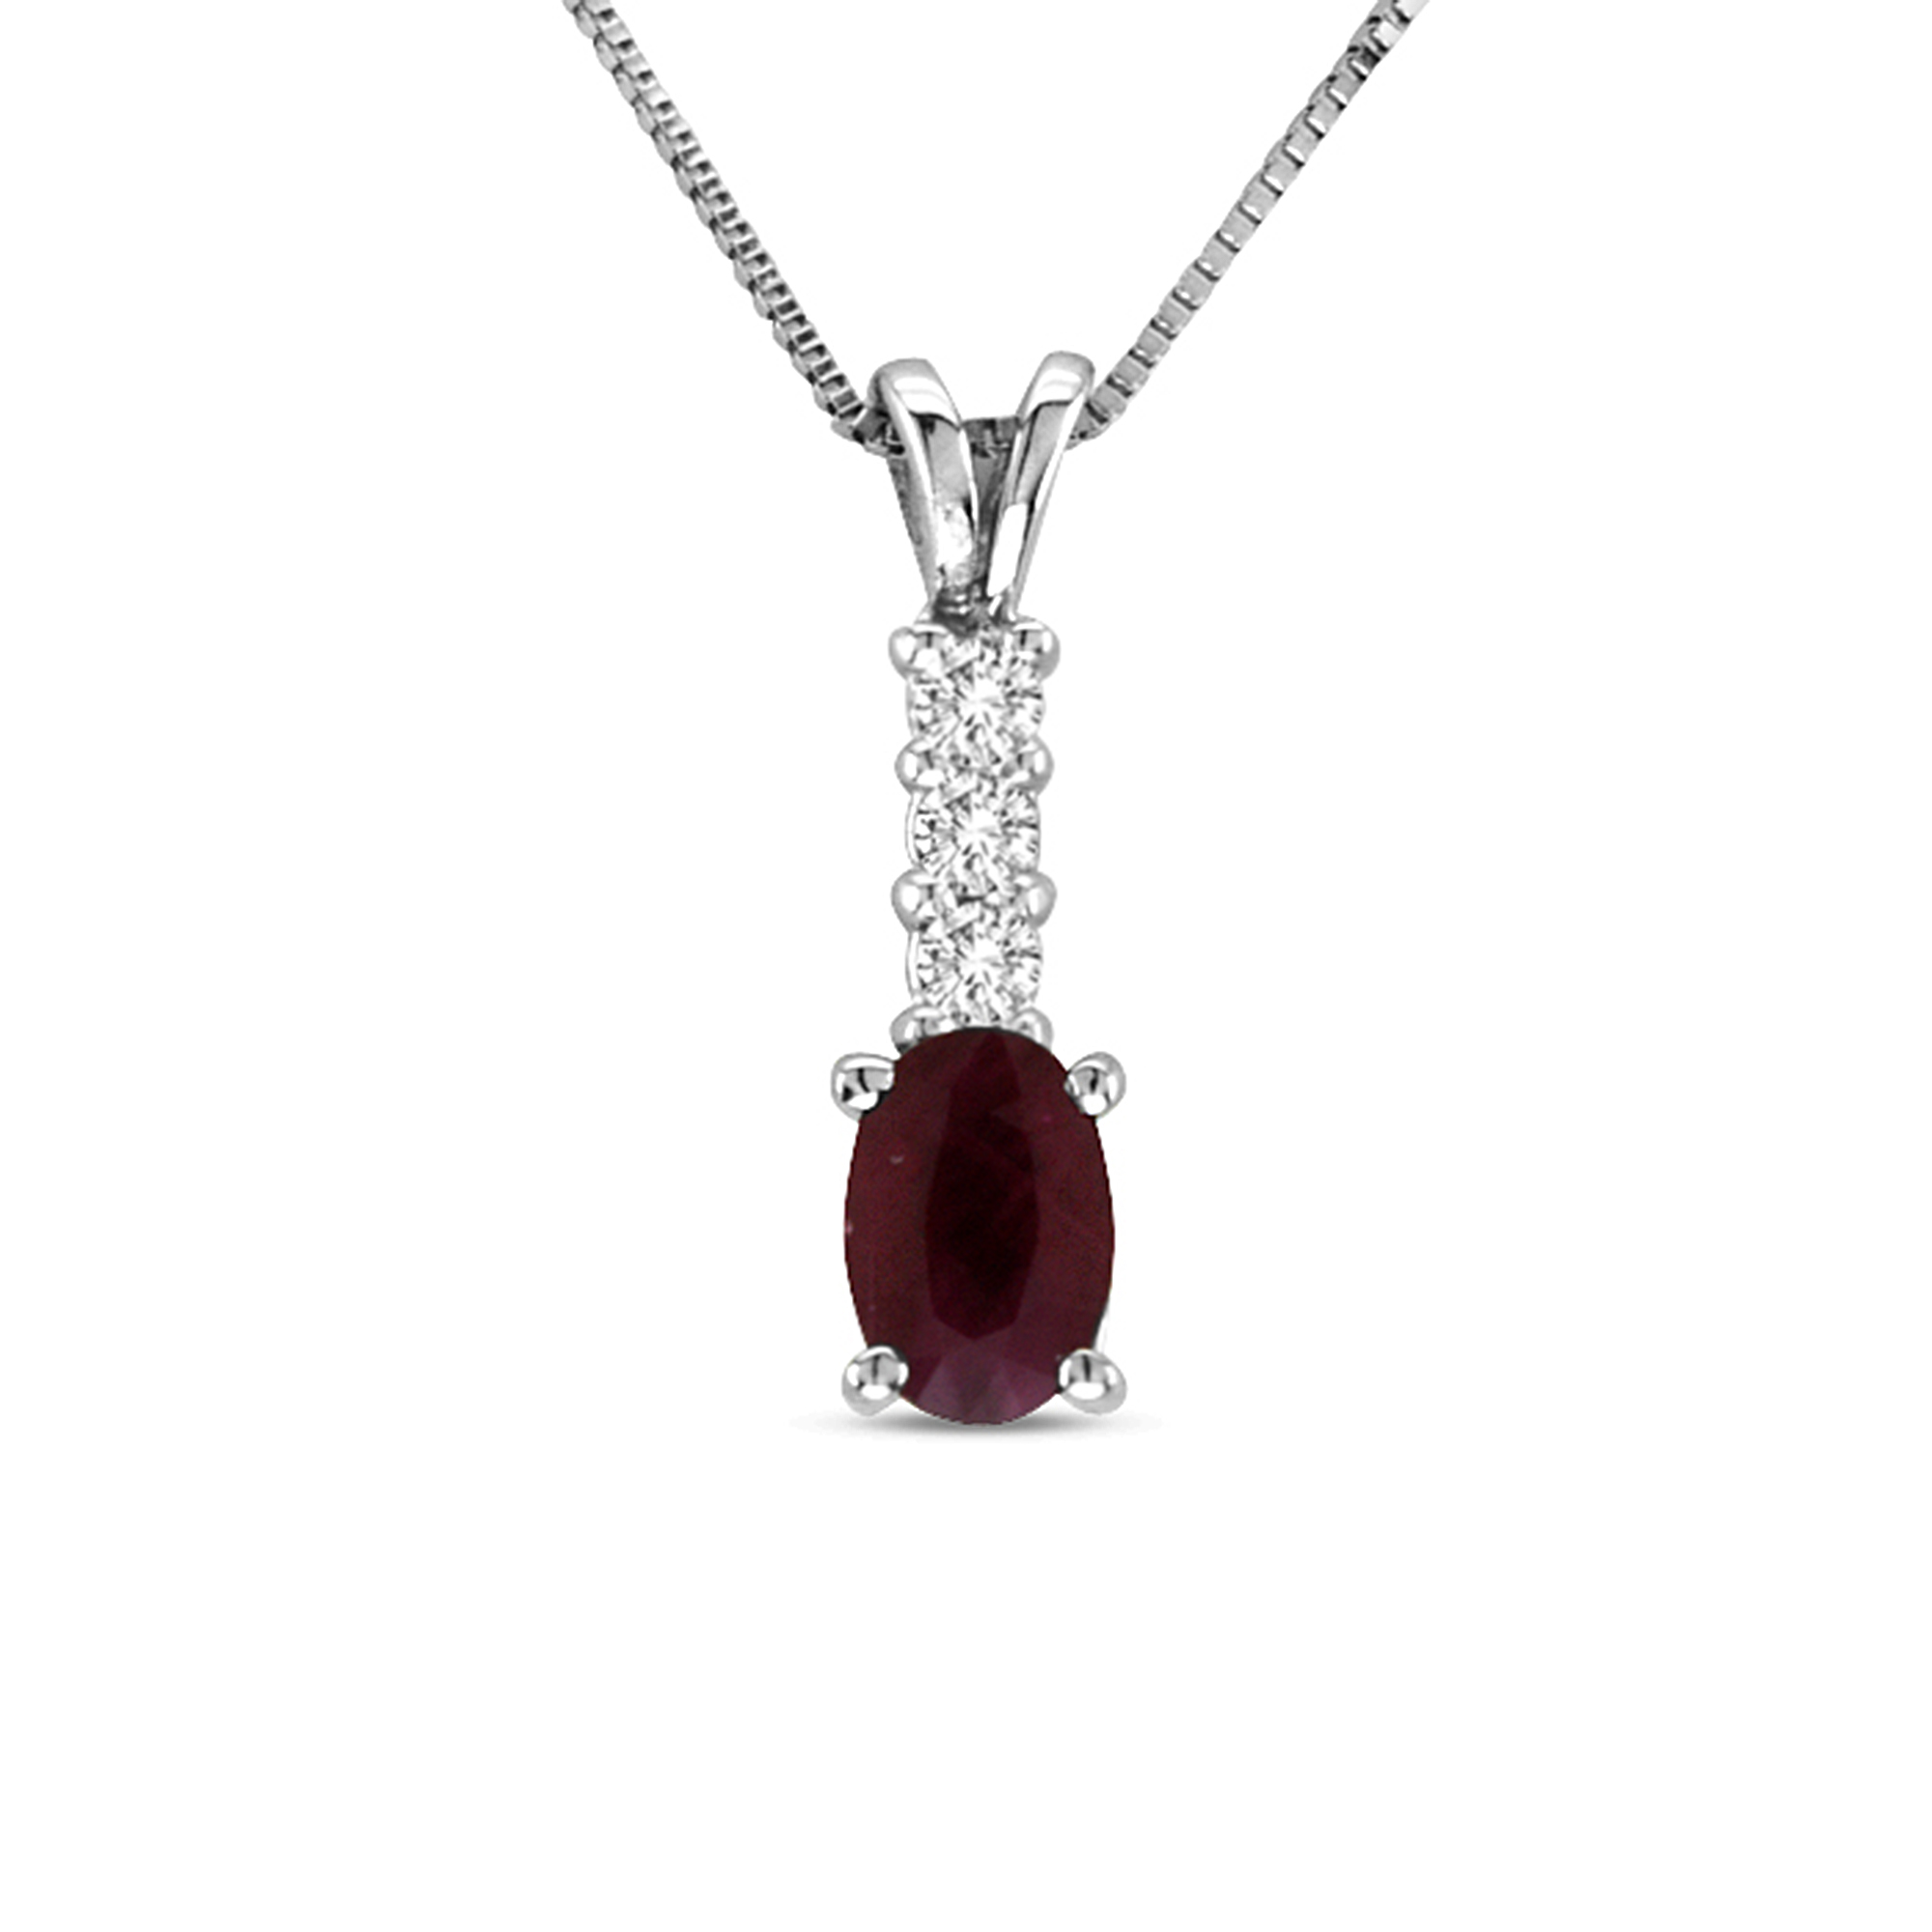 View 0.59cttw Ruby and Diamond Pendant in 14k Gold